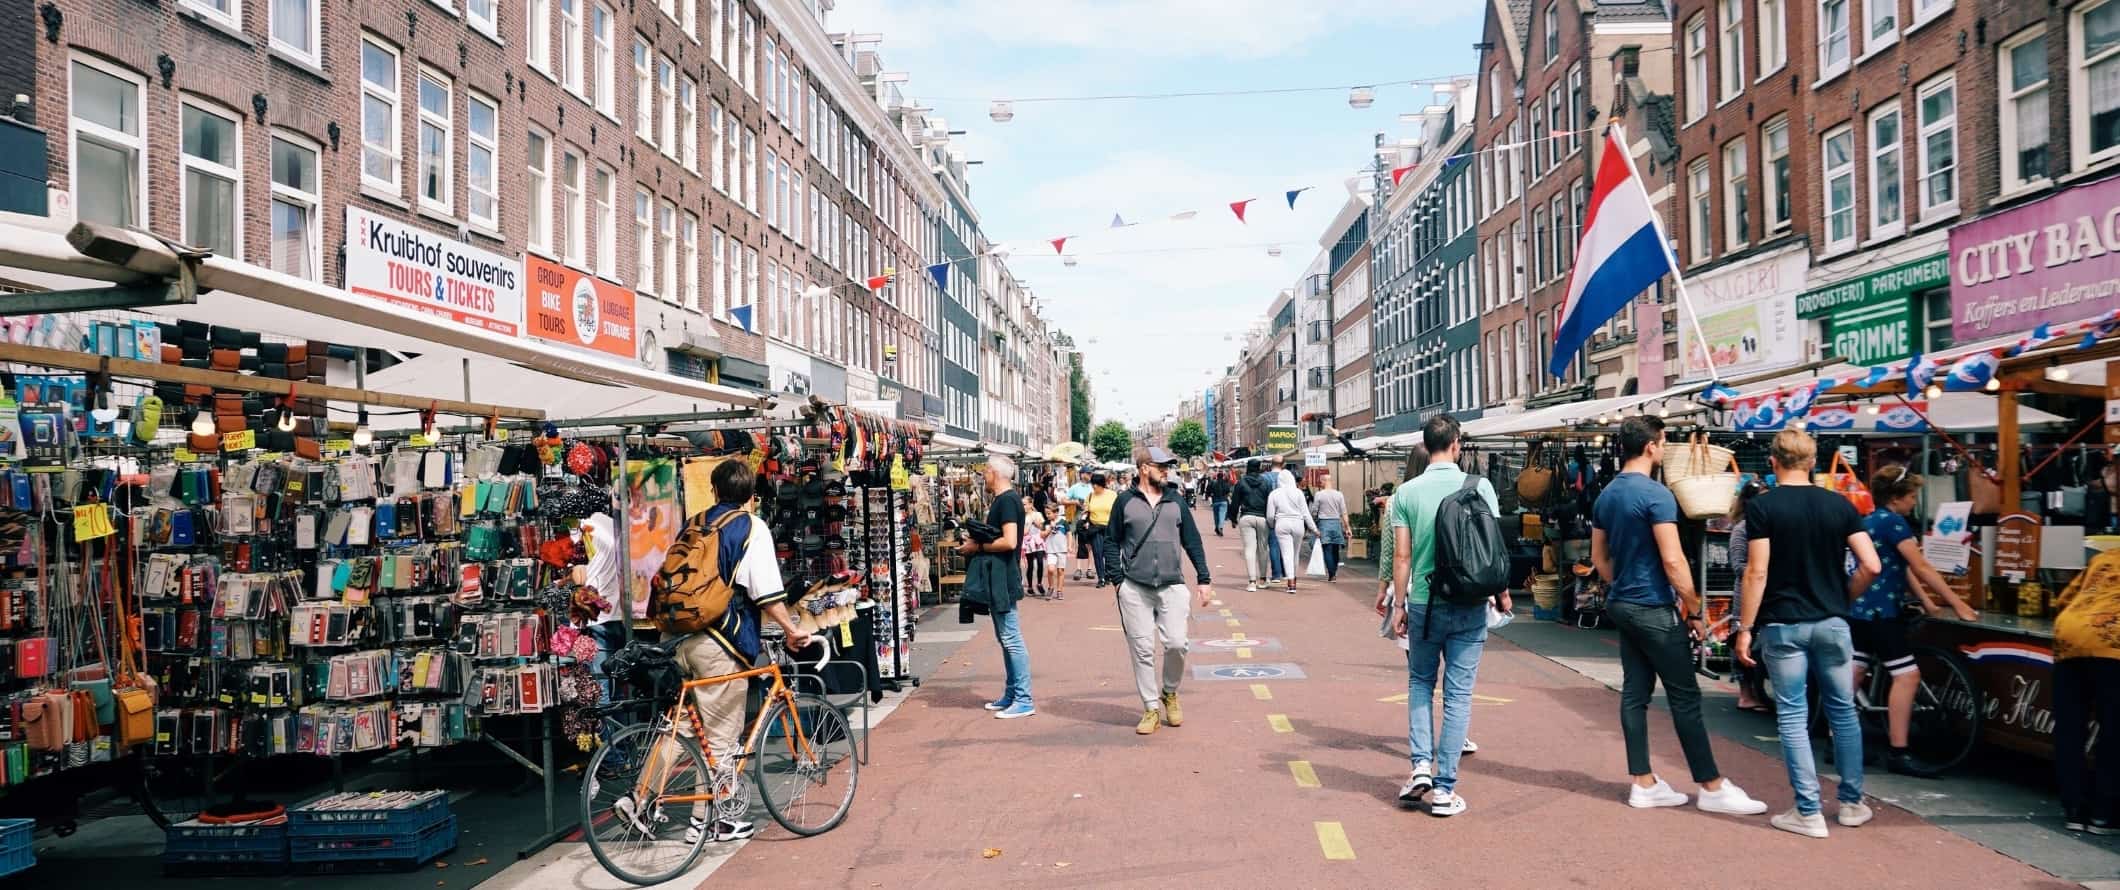 People walking down a pedestrianized street lined with market stalls in Amsterdam, the Netherlands.